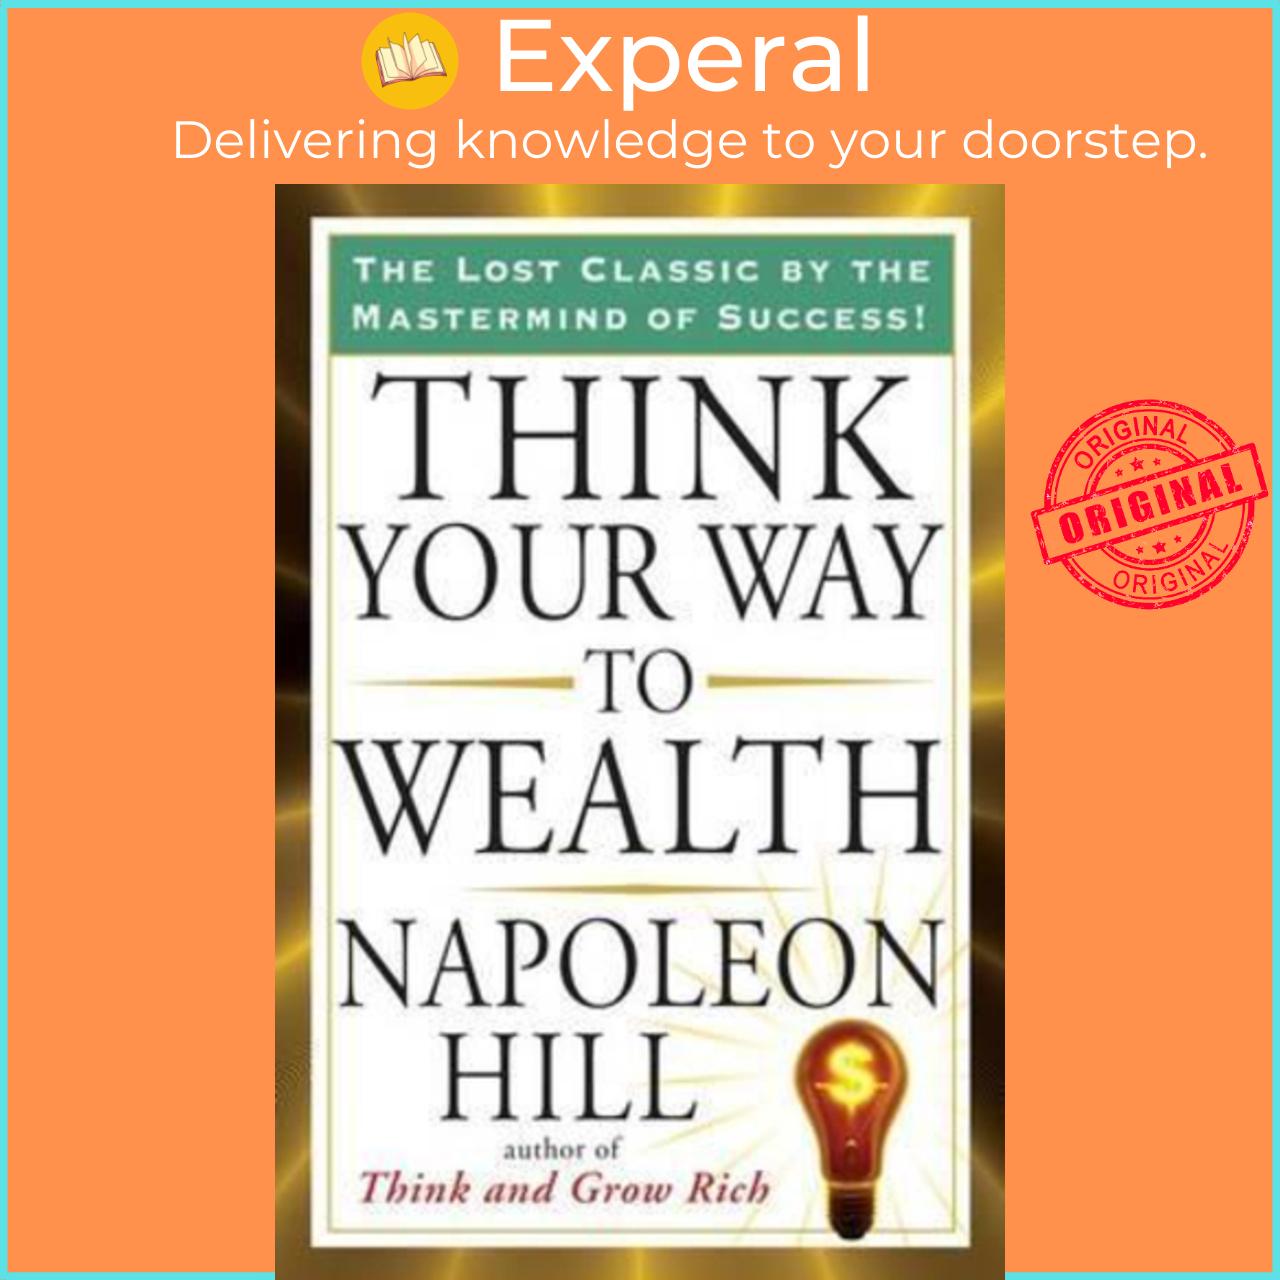 Sách - Think Your Way to Wealth by Napoleon Hill (US edition, paperback)